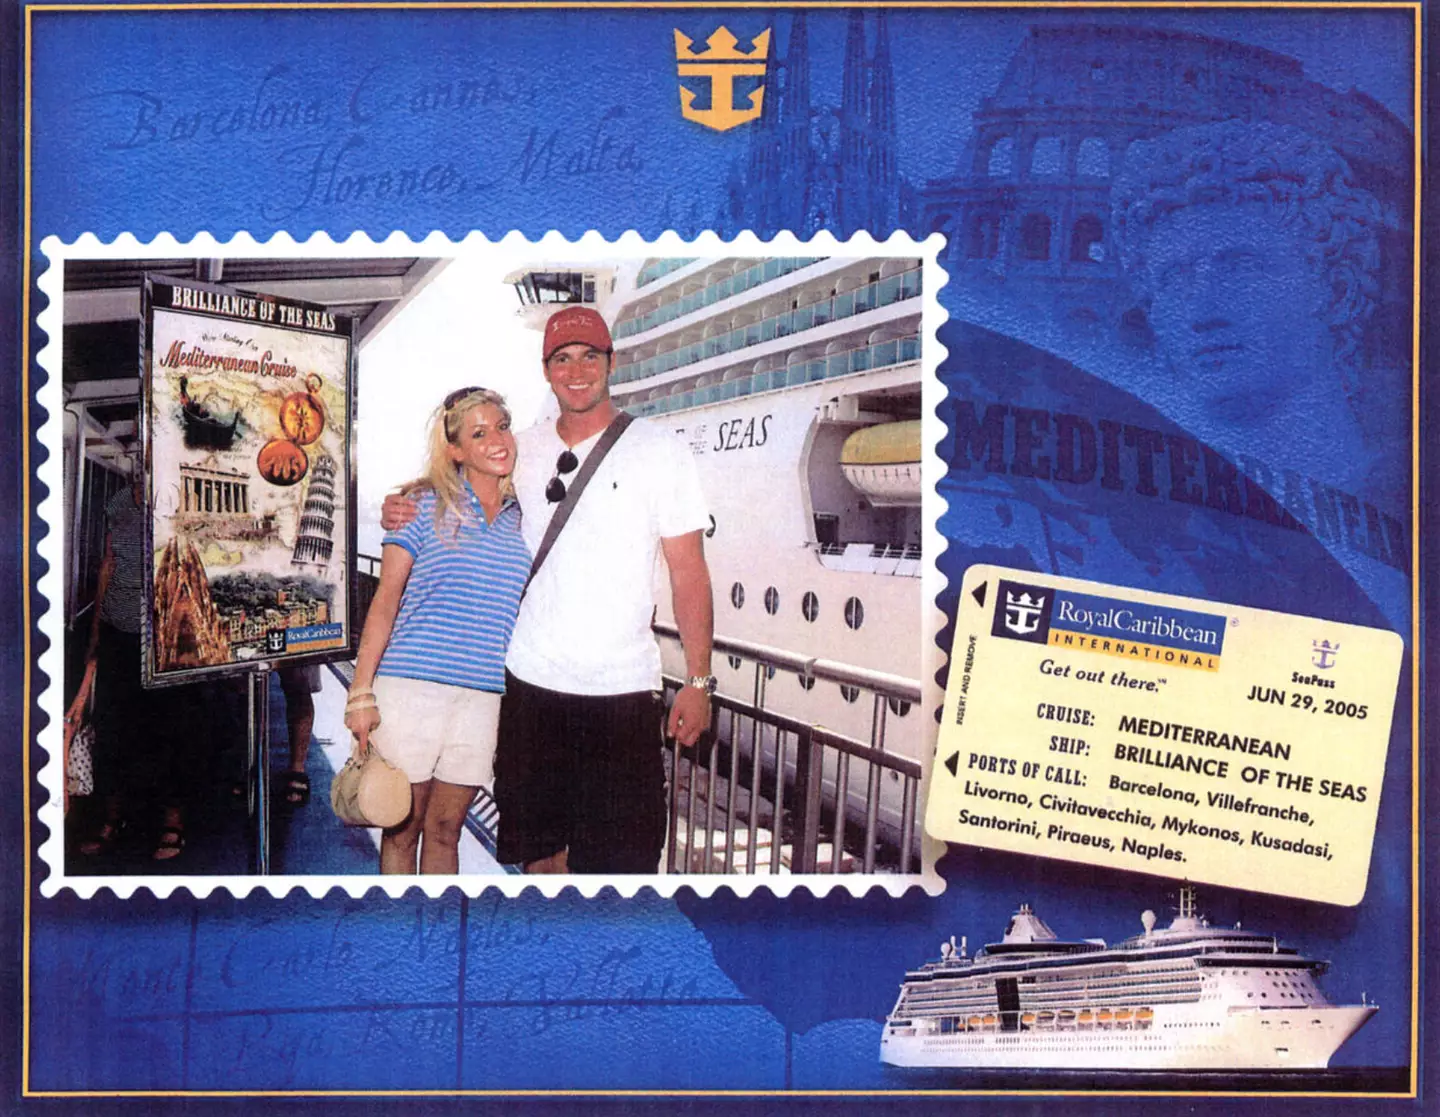 George and his new wife Jennifer planned a two week honeymoon onboard the cruise ship. (Royal Caribbean)